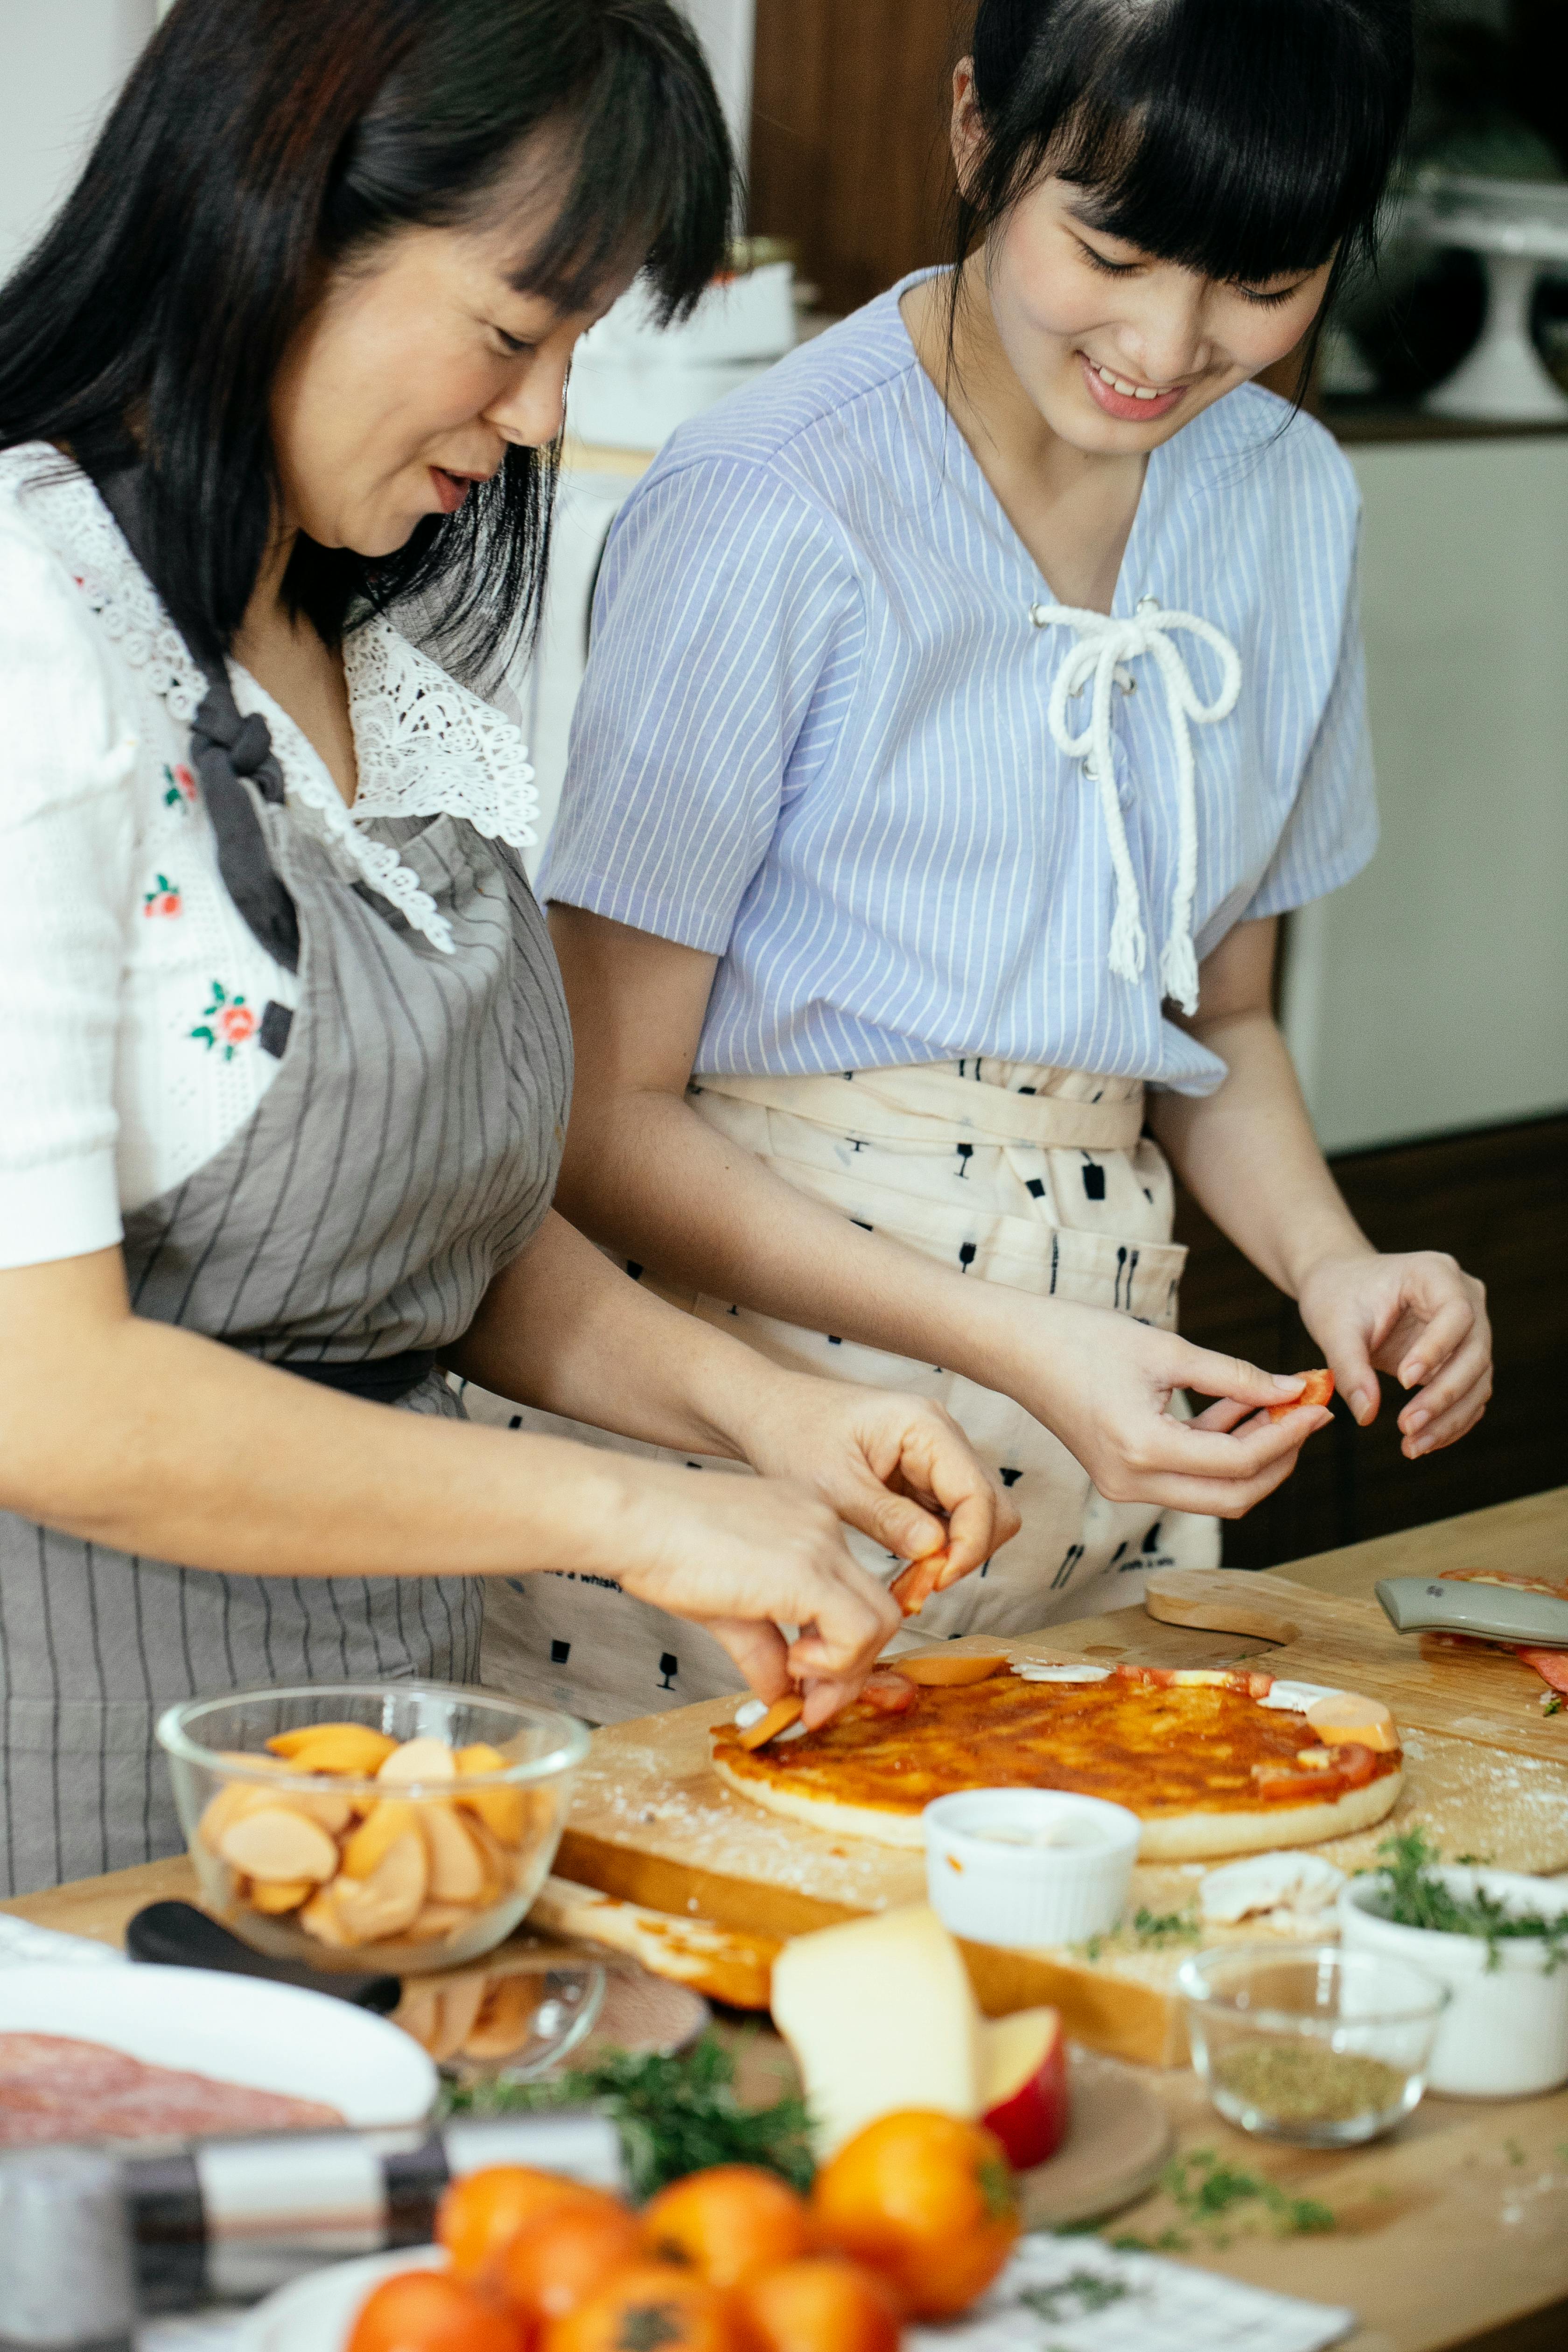 ethnic women on kitchen cooking pizza together